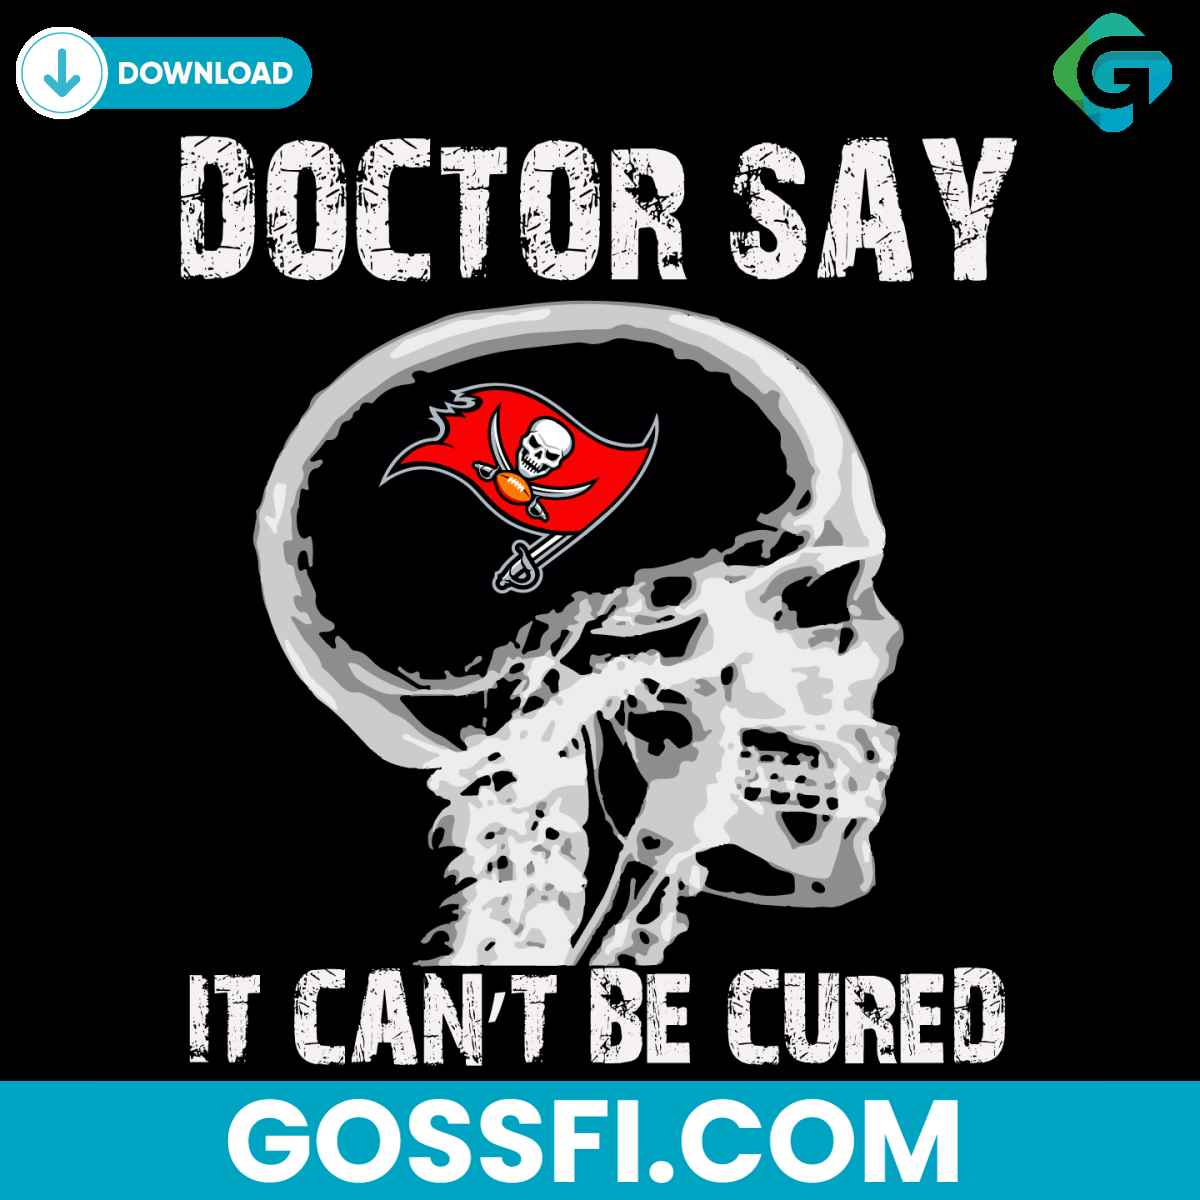 doctor-say-it-cannot-be-cured-tampa-bay-buccaneers-svg